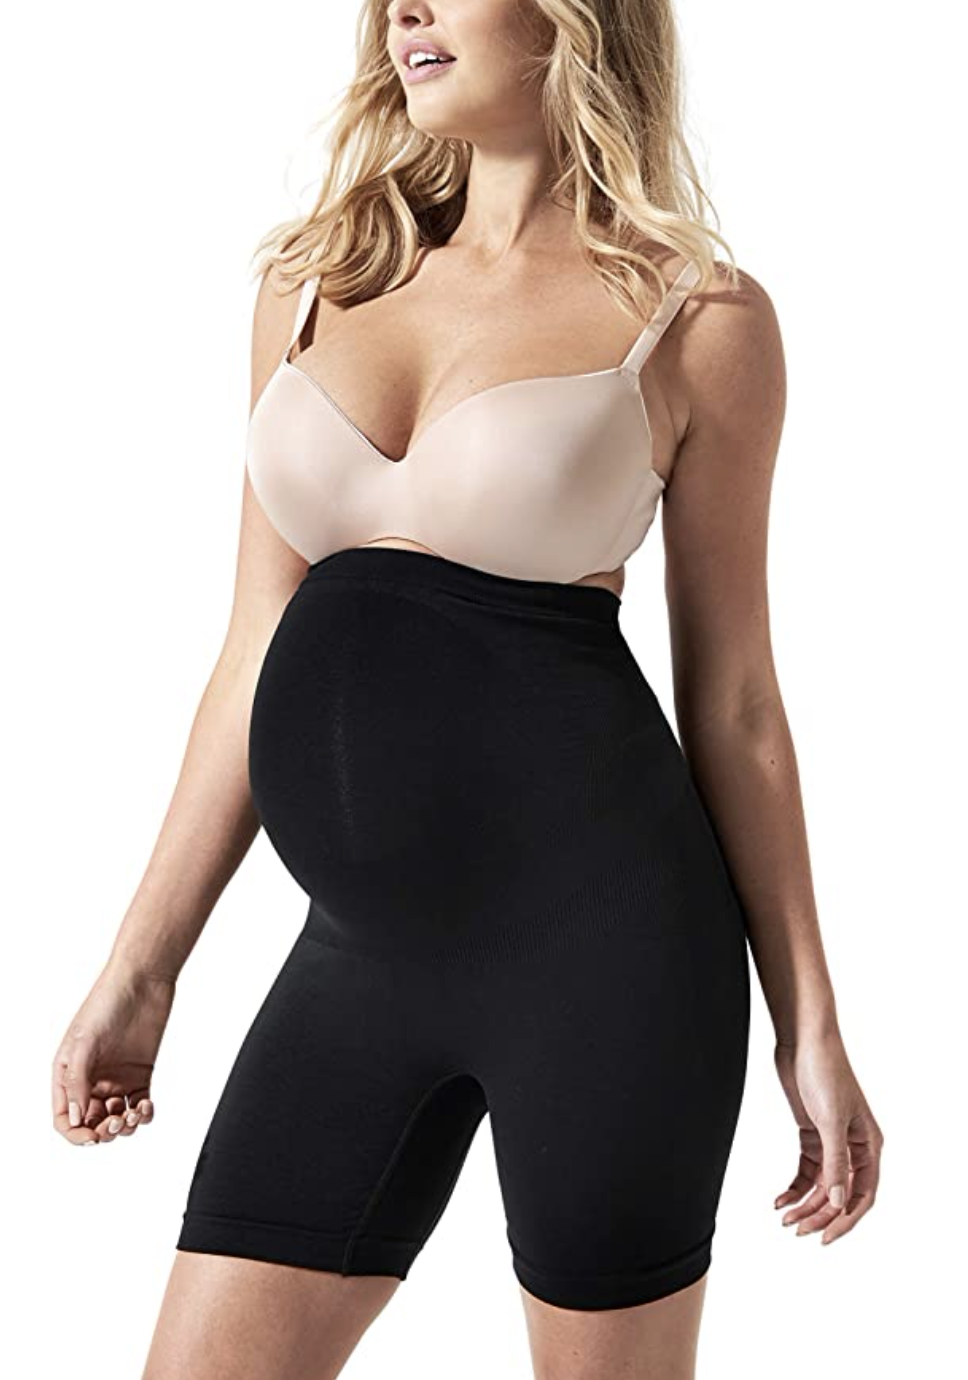 BLANQI Everyday Maternity Belly Support Girlshort | Maternity Workout Clothes